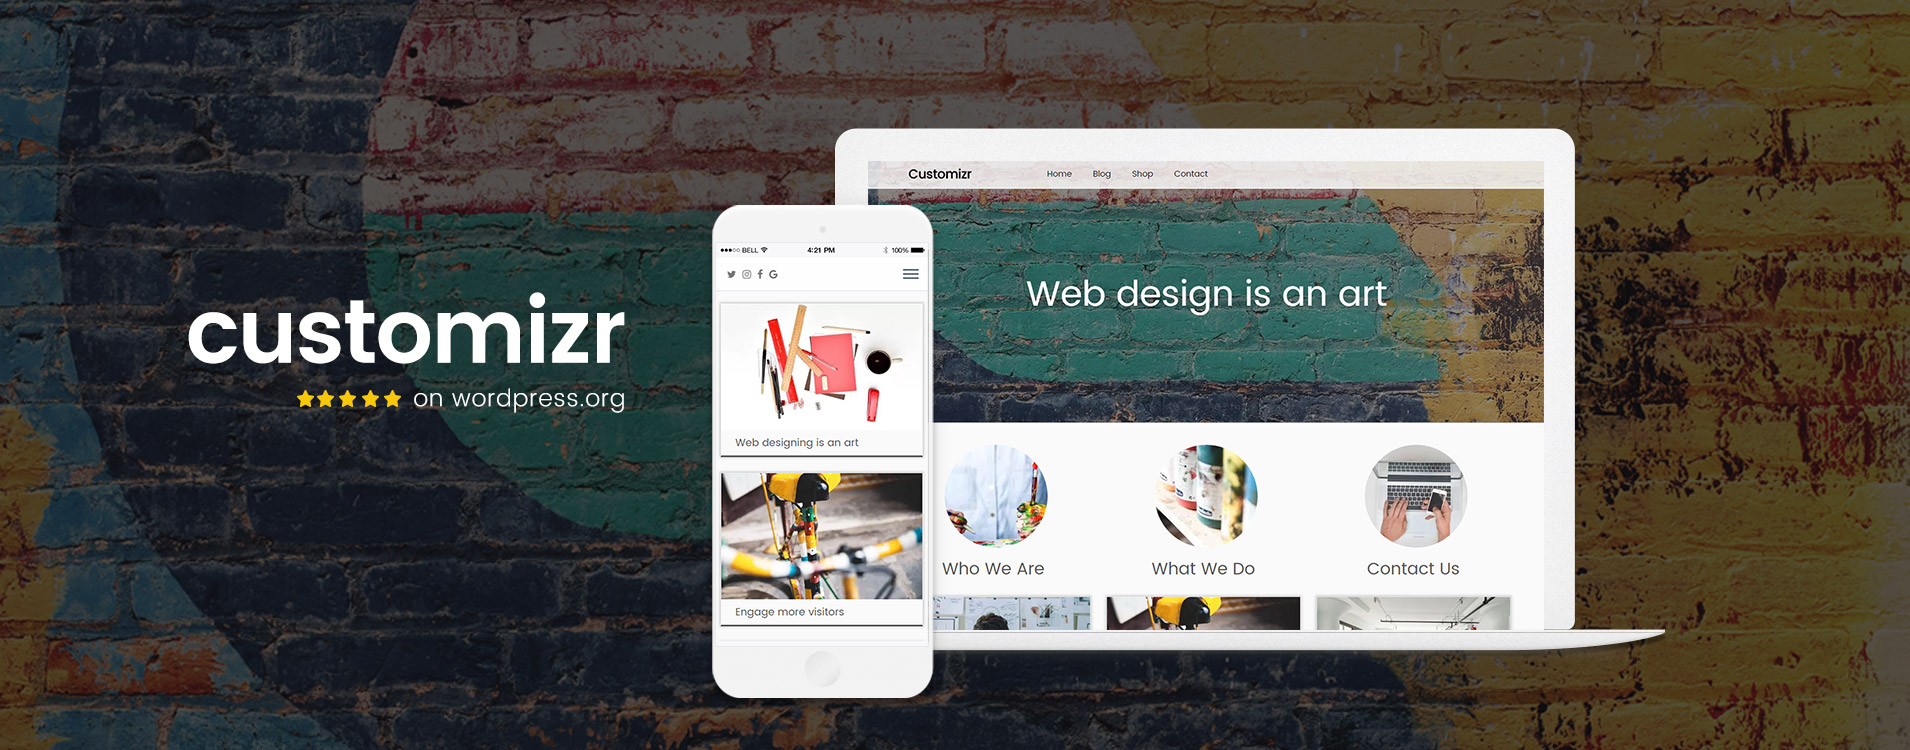 Customizr is a clean responsive theme